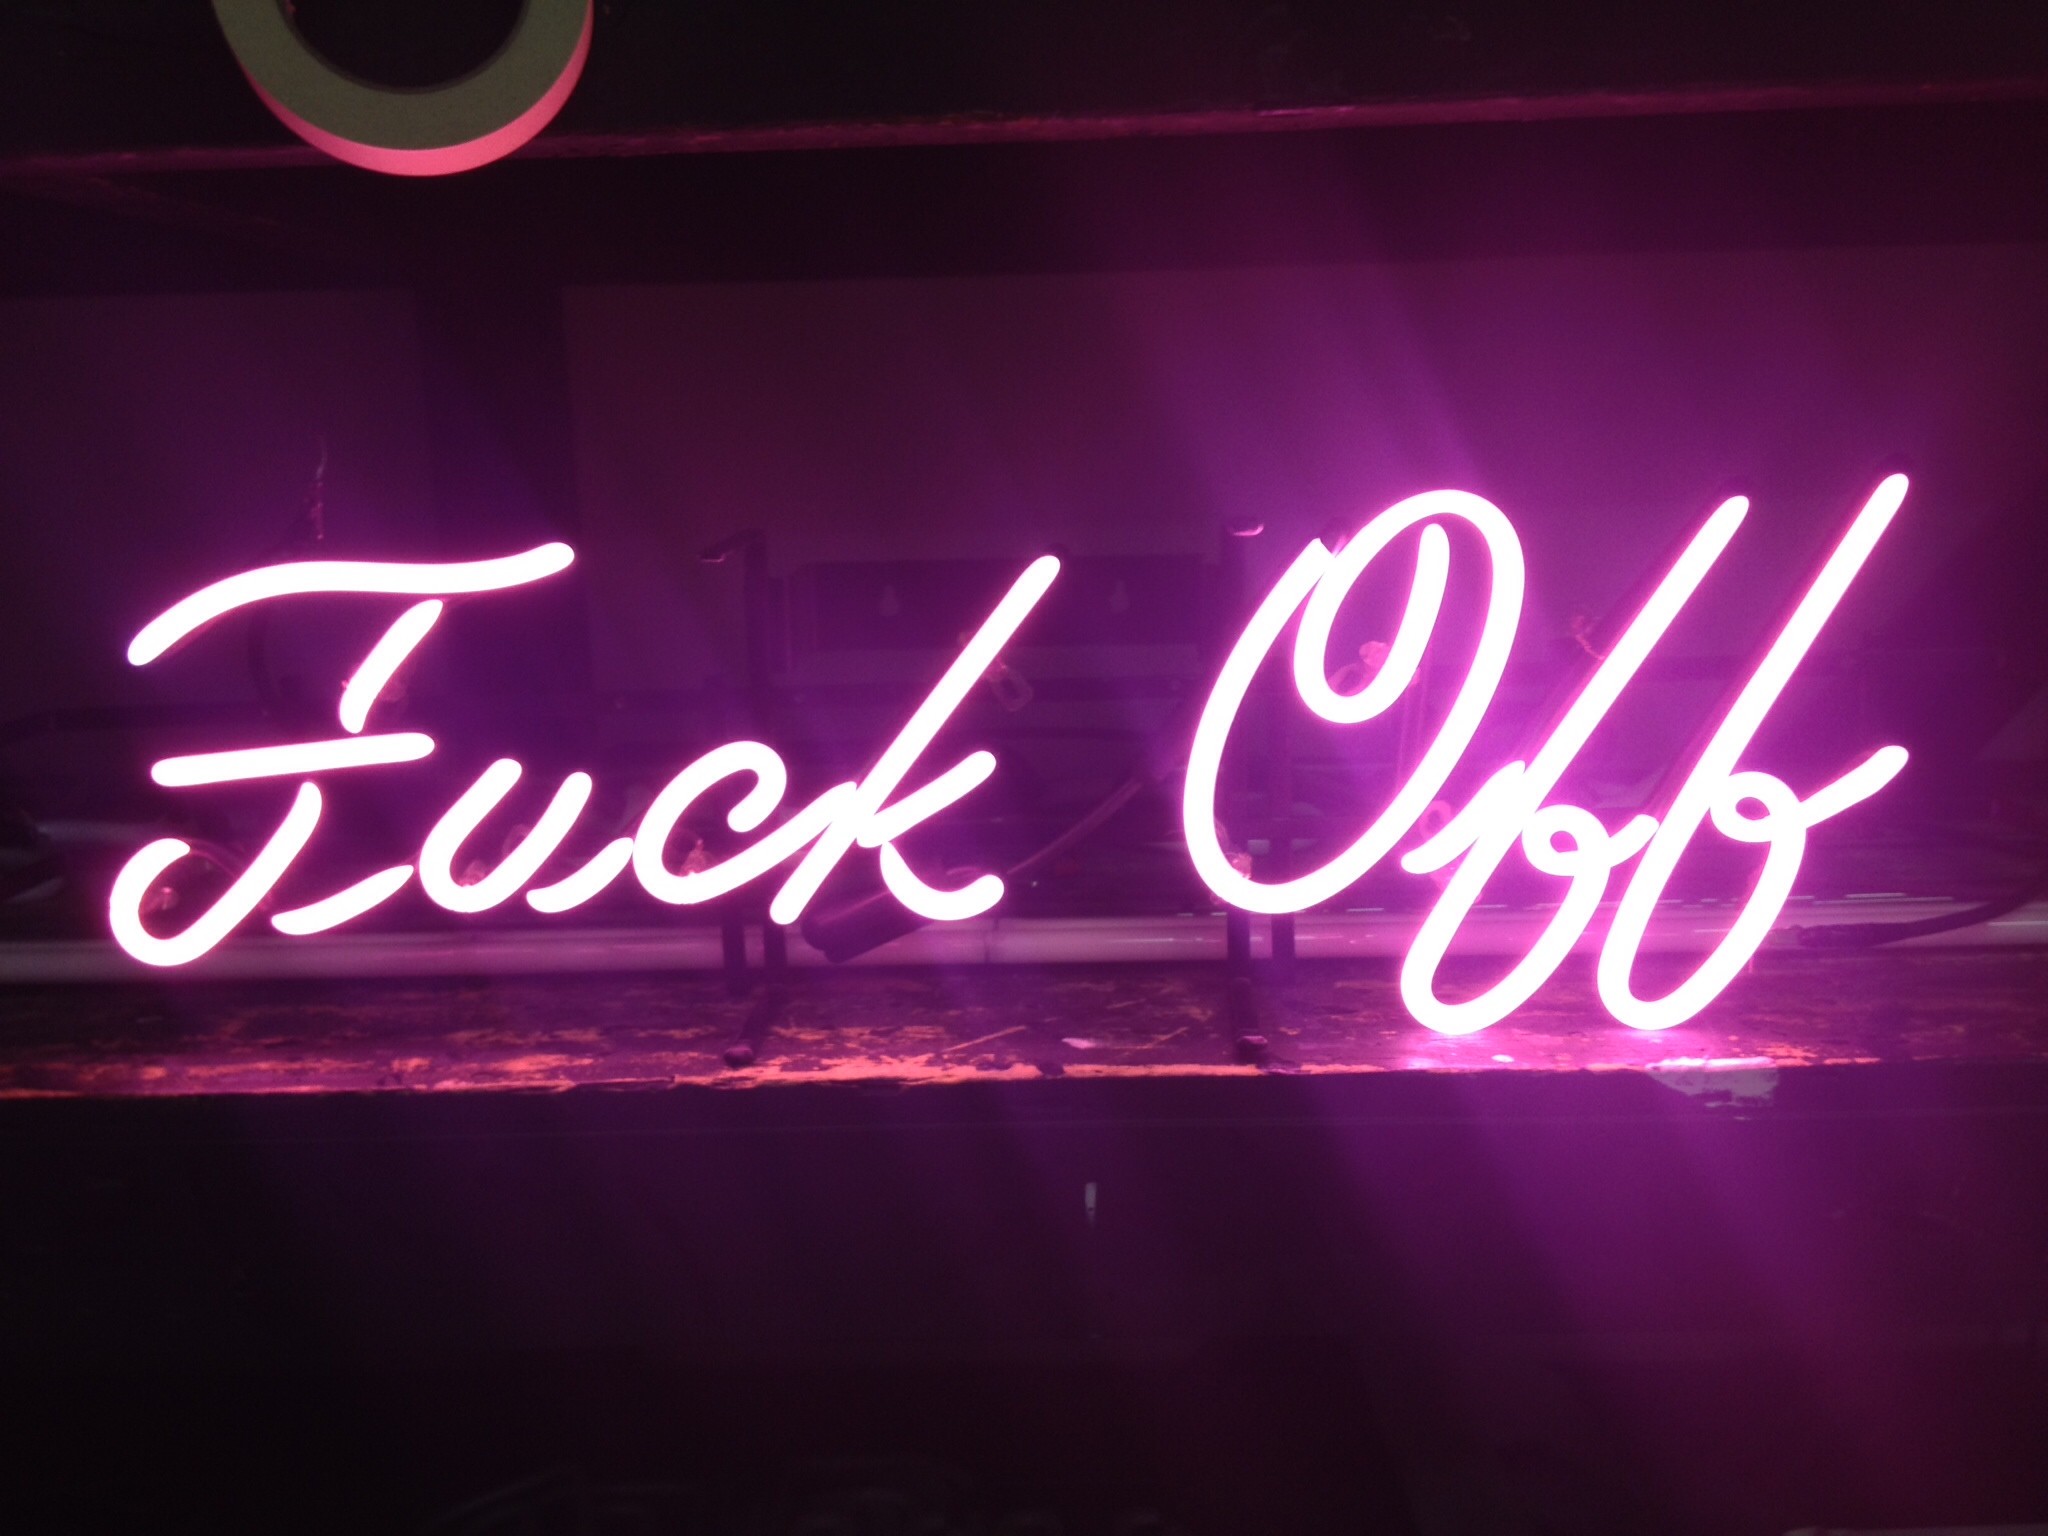 Neon Signs Wallpaper 52 Images